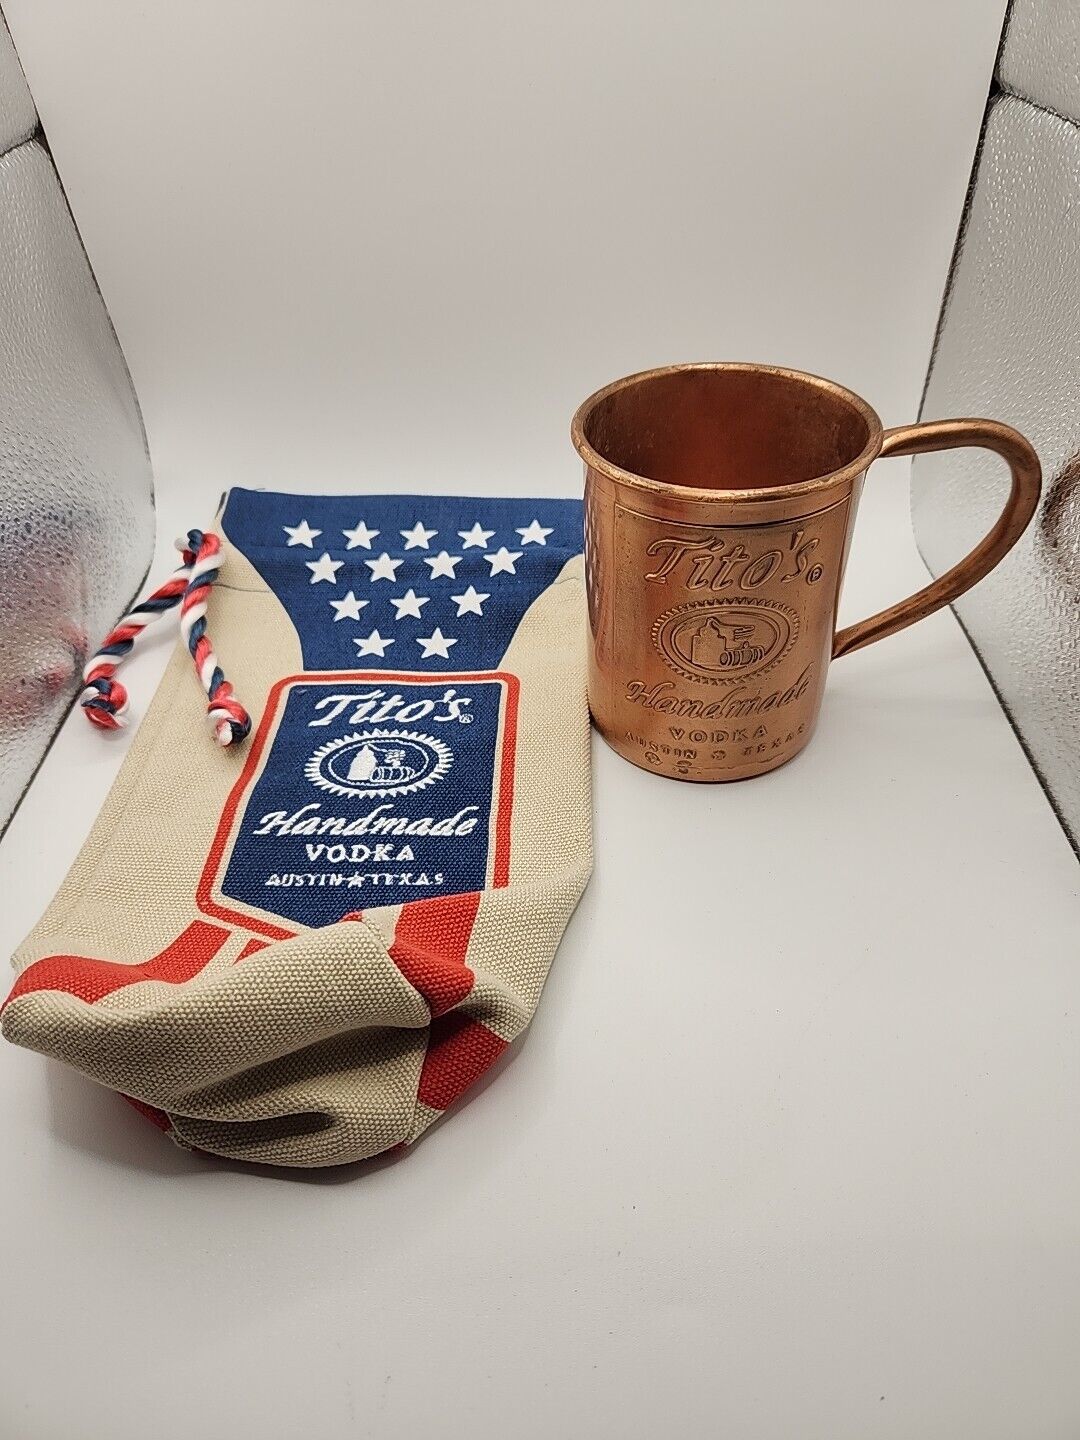 Vintage Titos Handmade Vodka Copper Moscow Mule Mug And Titos Embroidered Bag